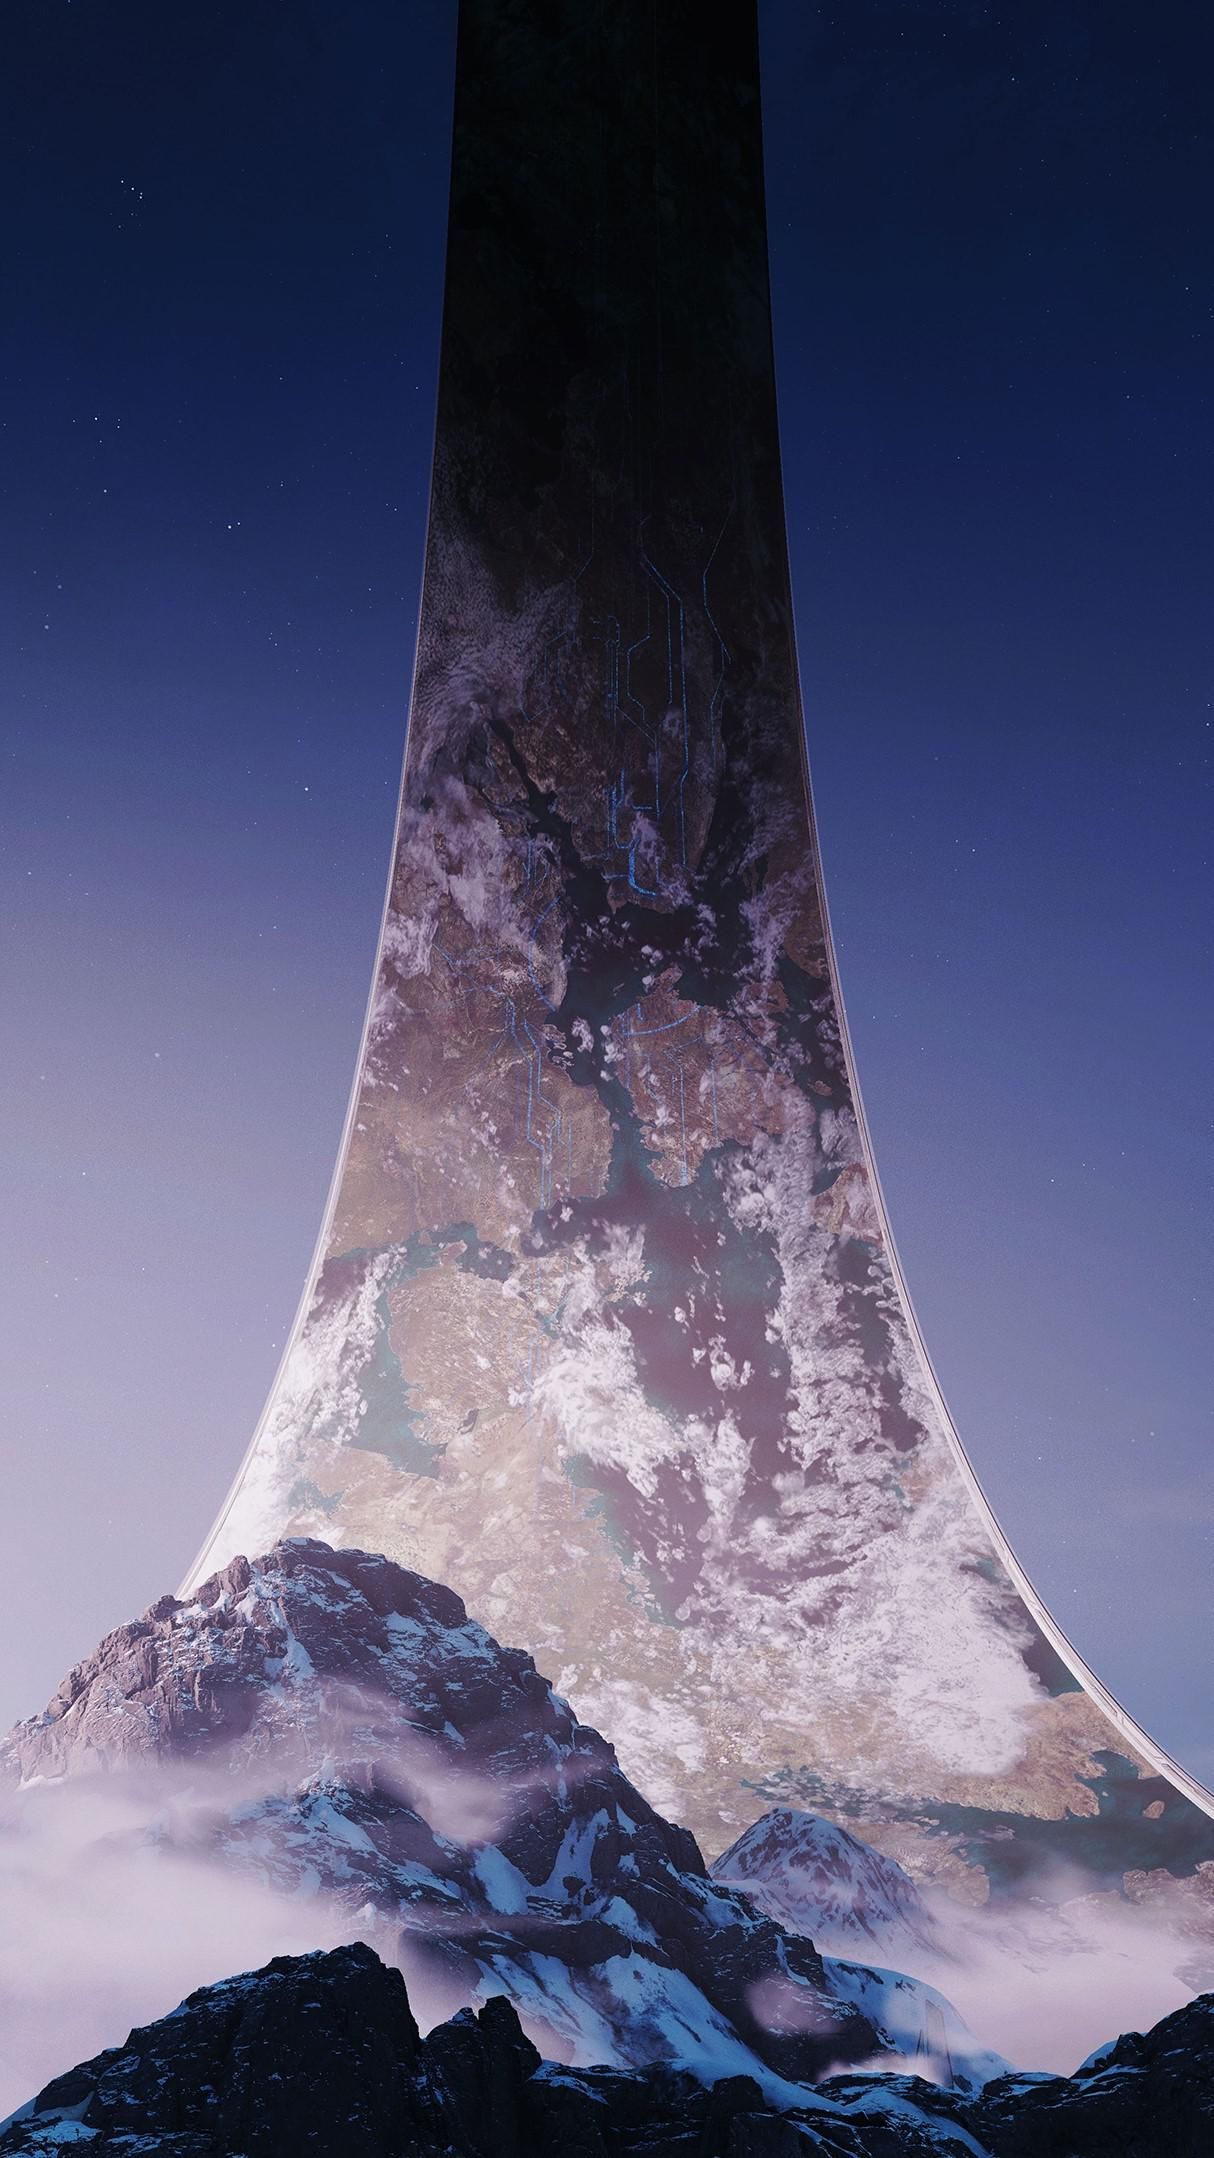 HALO PHONE WALLPAPER 1214x2158. Halo background, Halo poster, Halo game